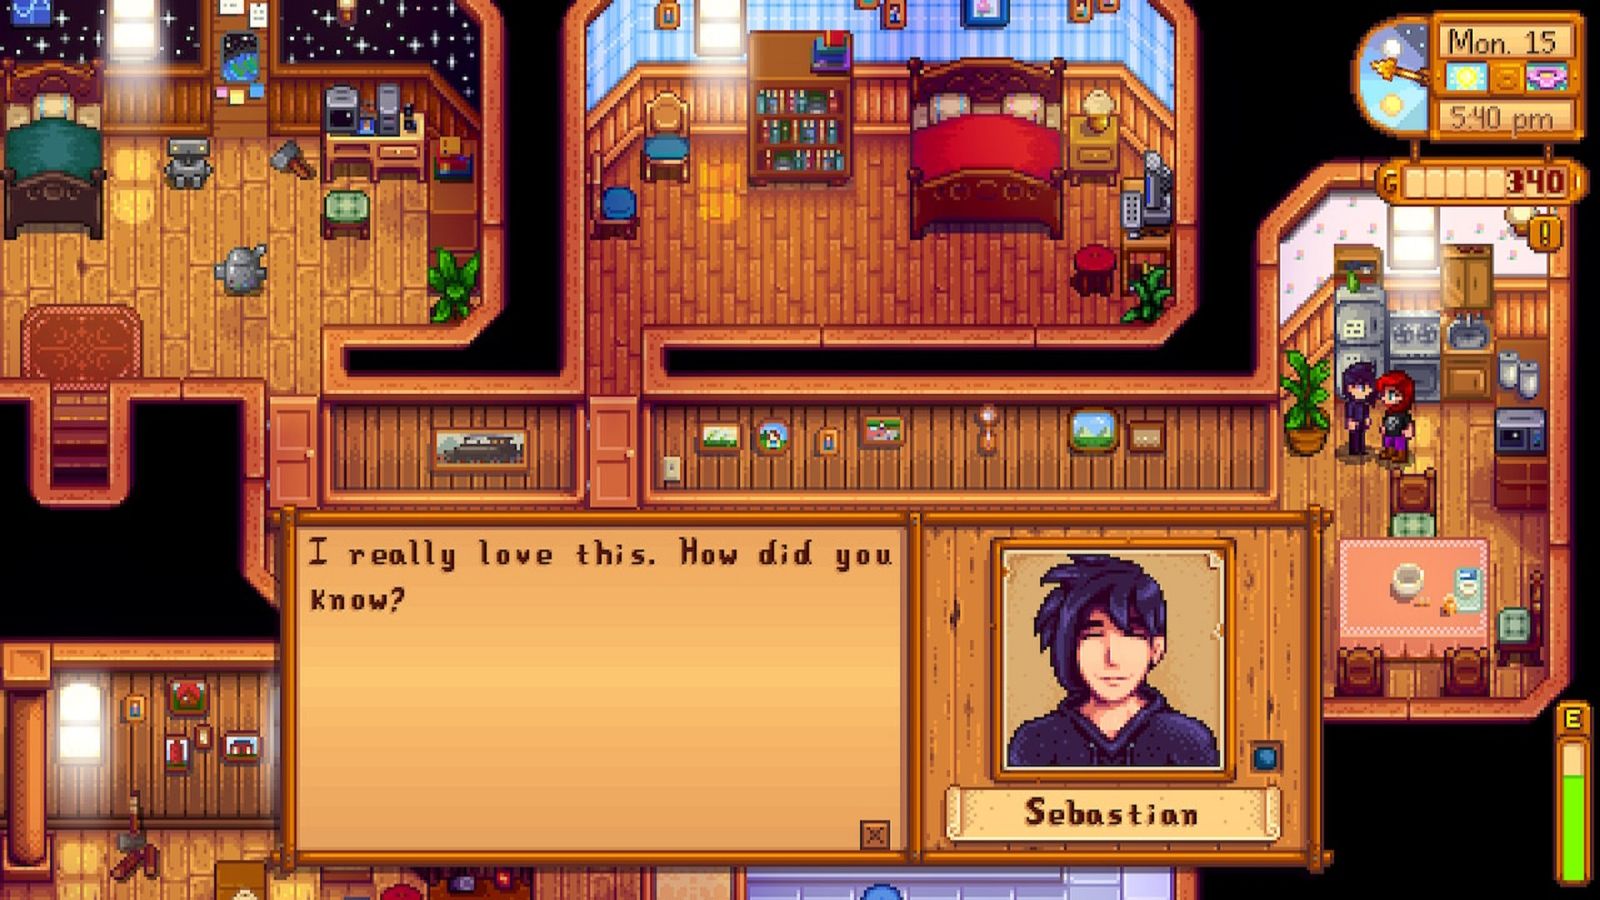 Stardew Valley character Sebastian receives a loved gift